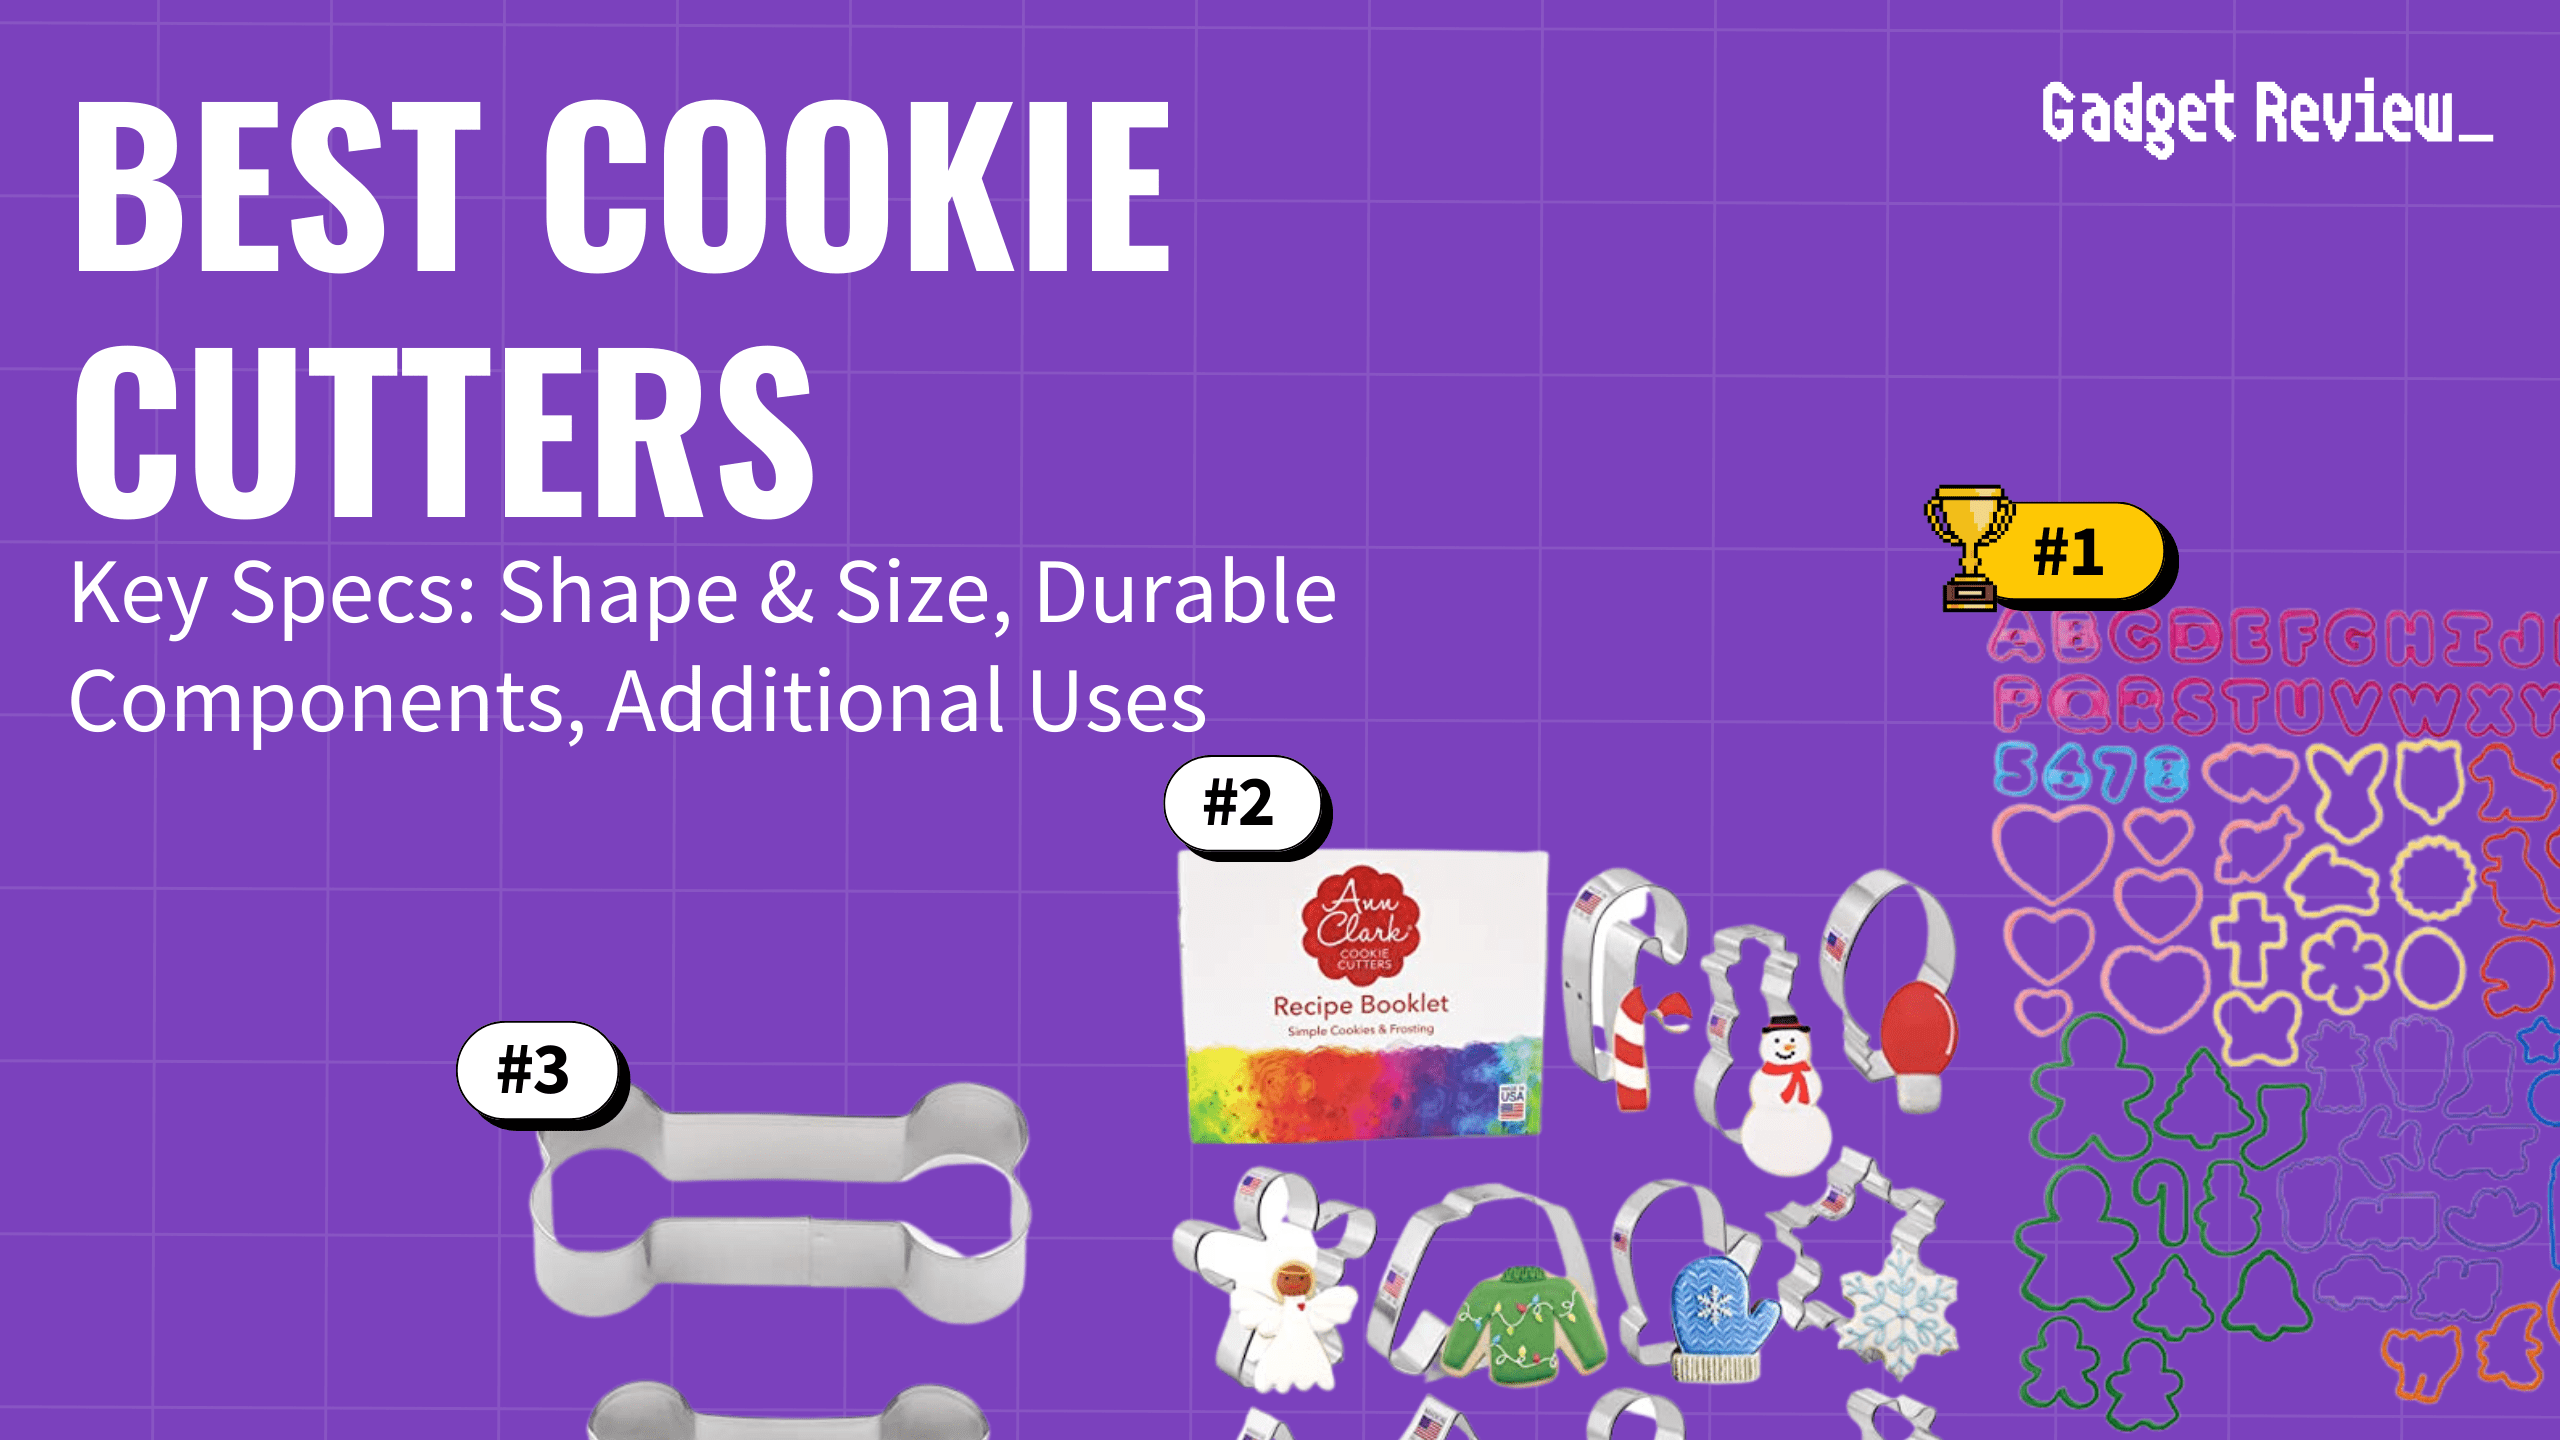 best cookie cutters featured image that shows the top three best kitchen product models